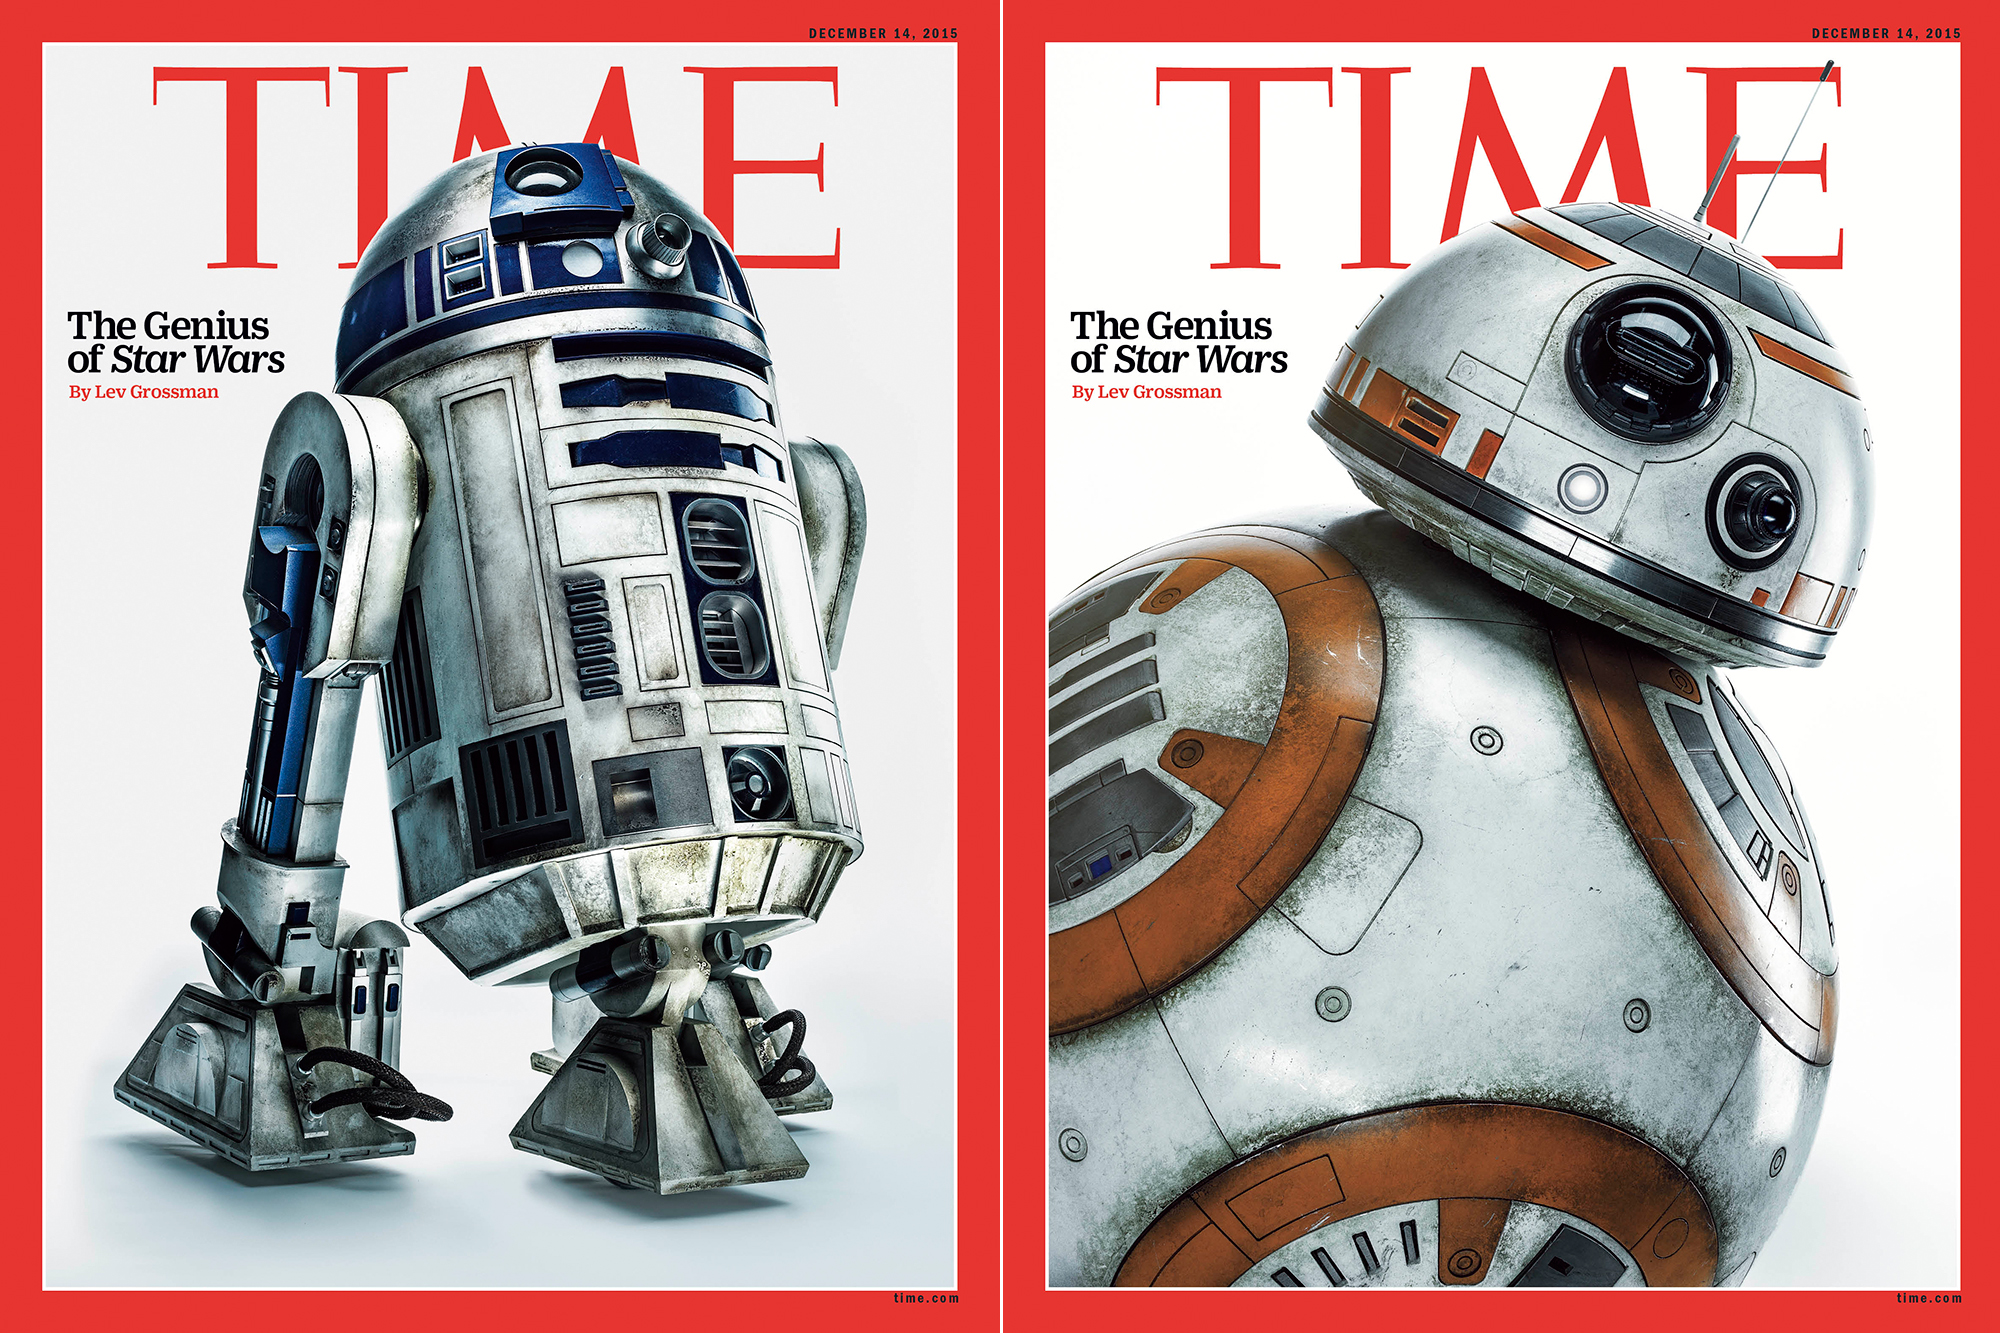 R2-D2 and BB-8 on the cover of the Dec. 14, 2015 issue of TIME. (Marco Grob for TIME)